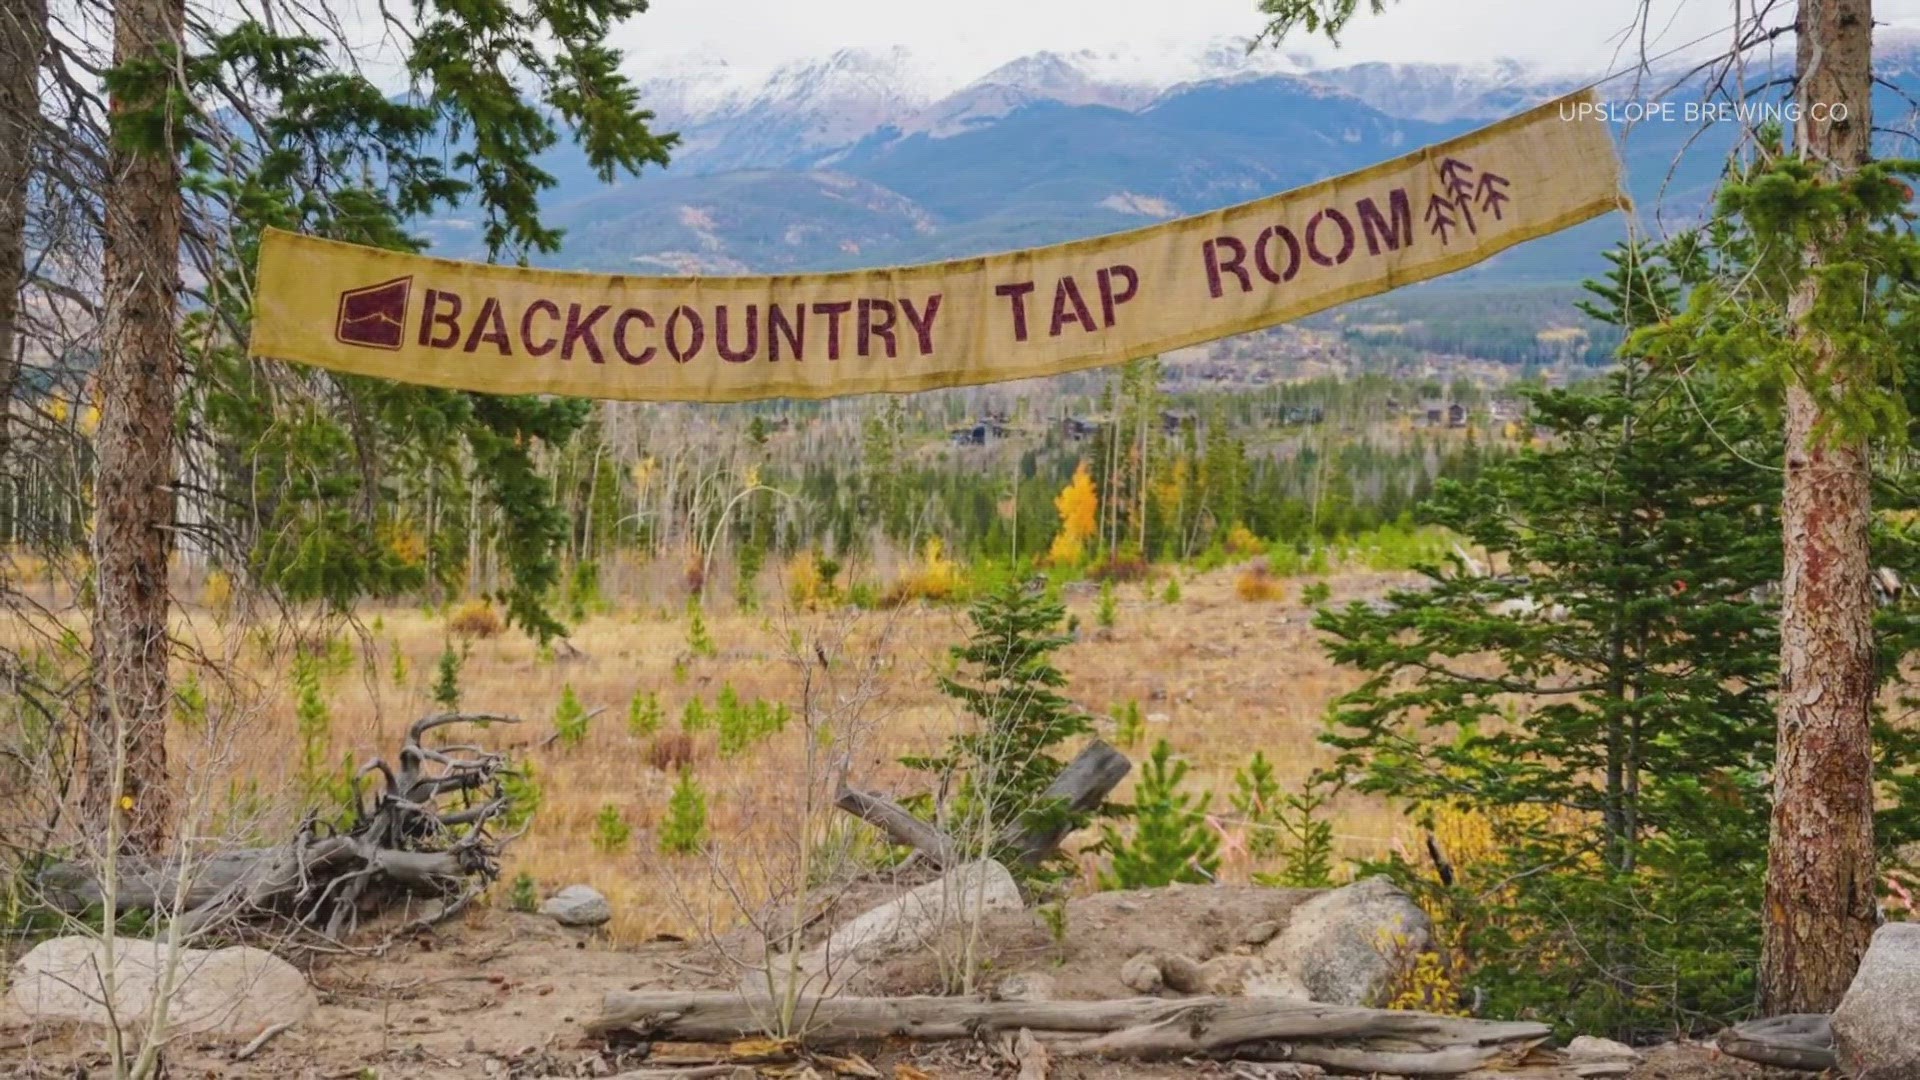 The 8th annual Backcountry Tap Room is a hike to a pop-up tap room experience for brews and views.